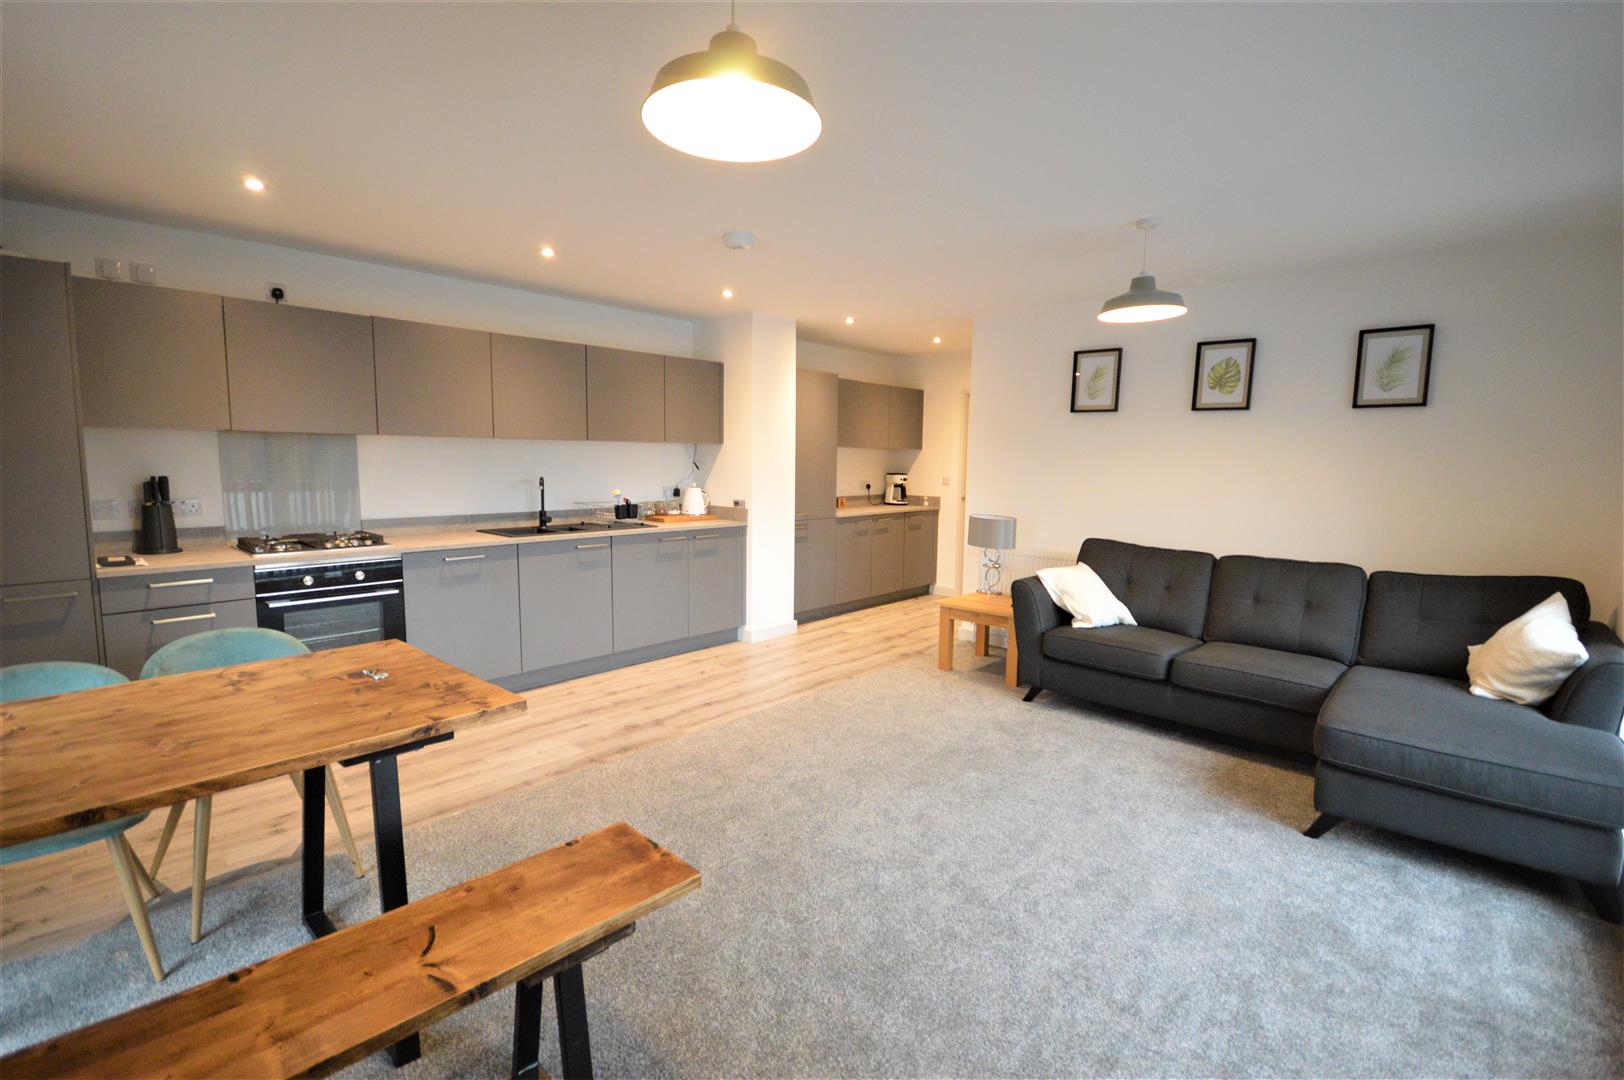 2 bed apartment for sale in Leominster, HR6